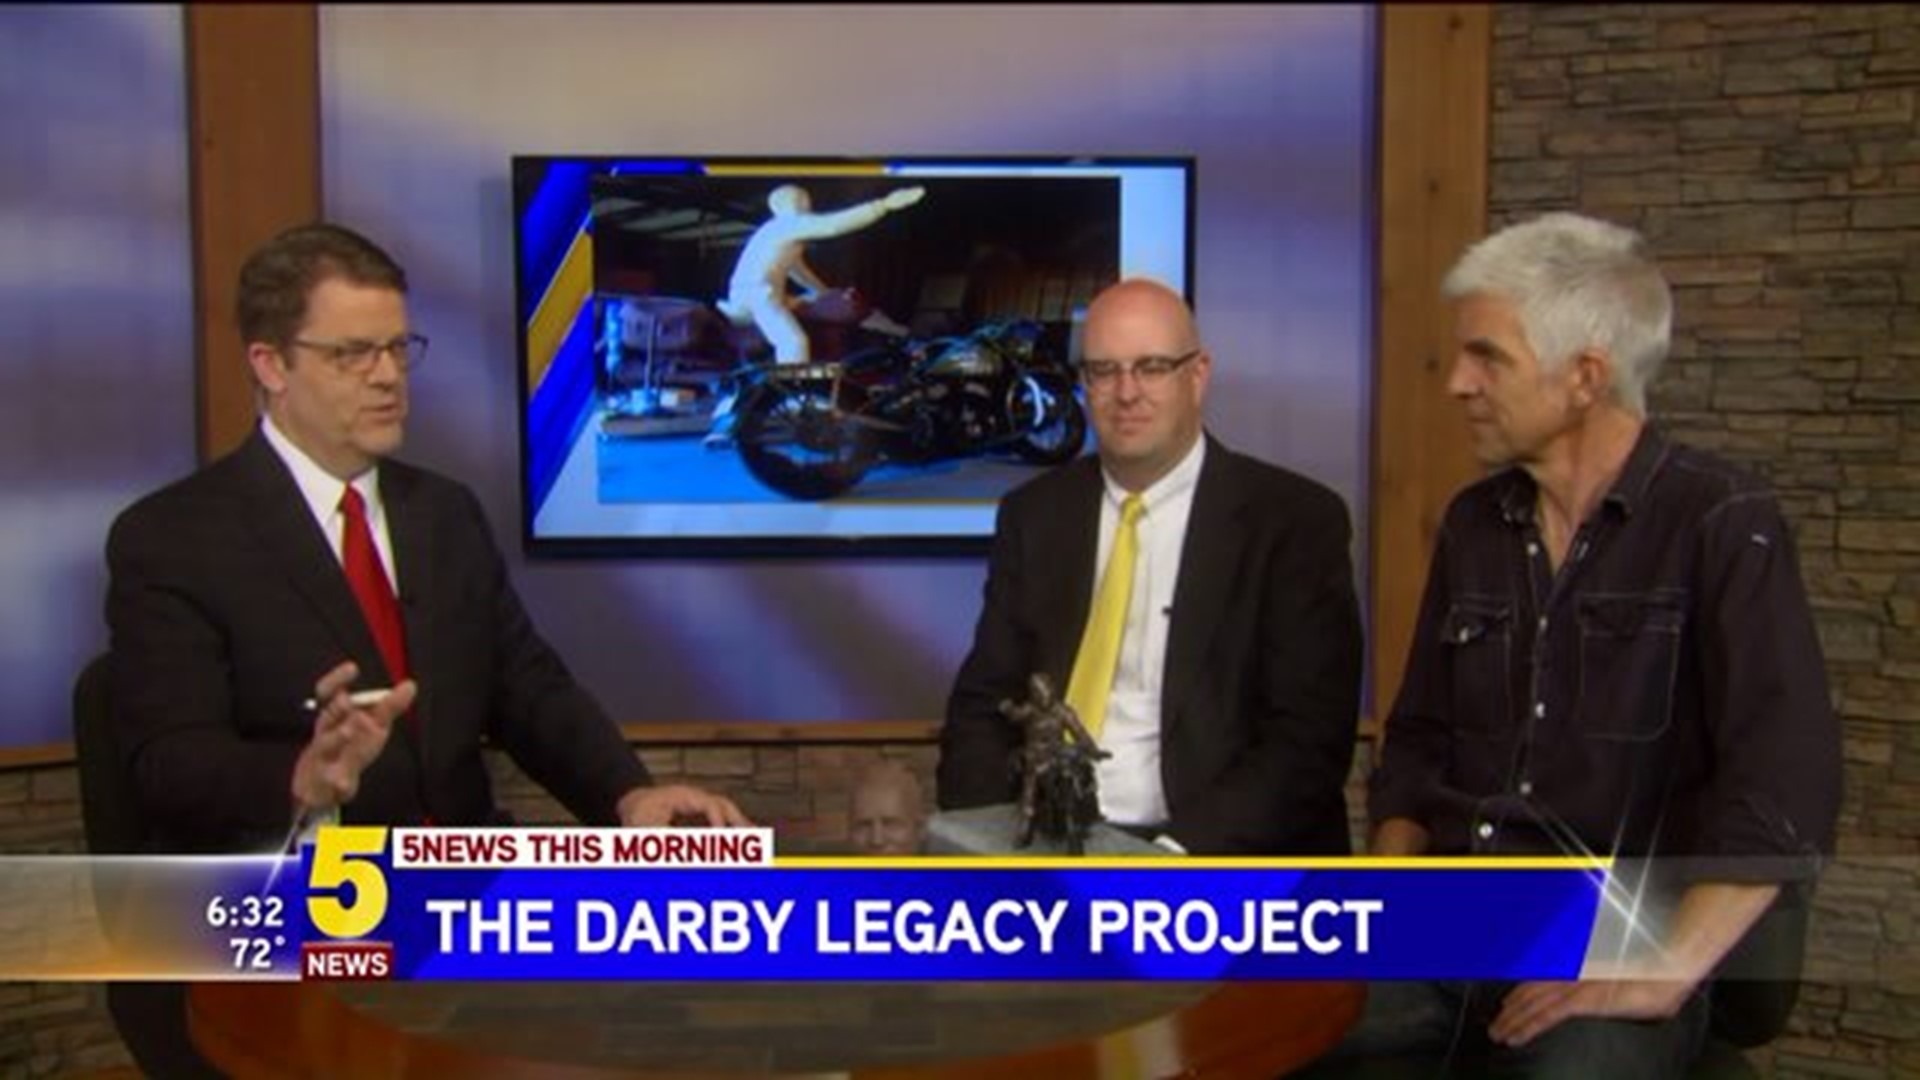 Darby Legacy Project